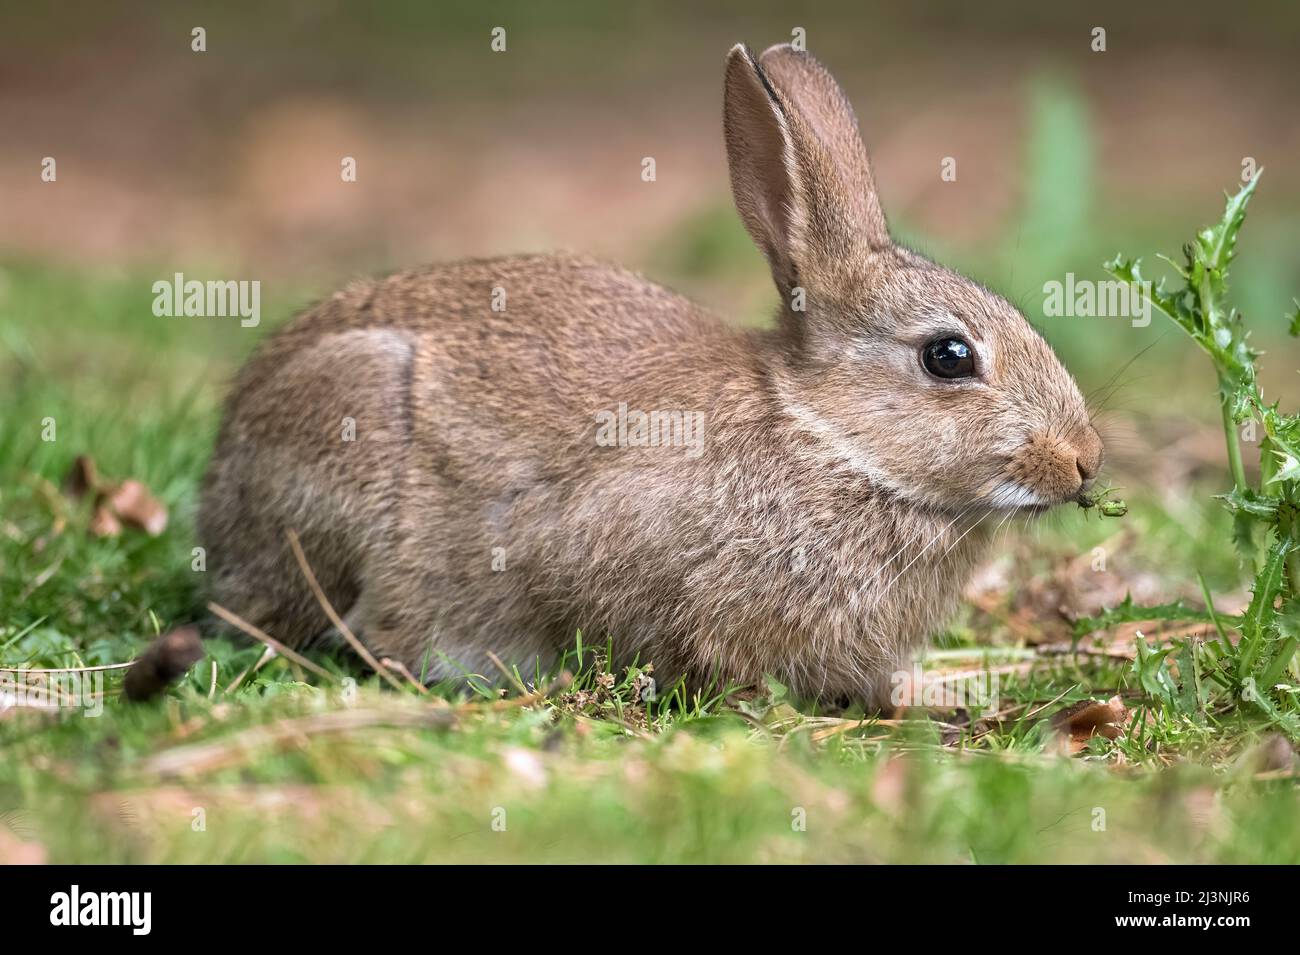 Rabbit baby sitting on the grass, eating a dandelion plant, close up in Scotland in the summer time Stock Photo